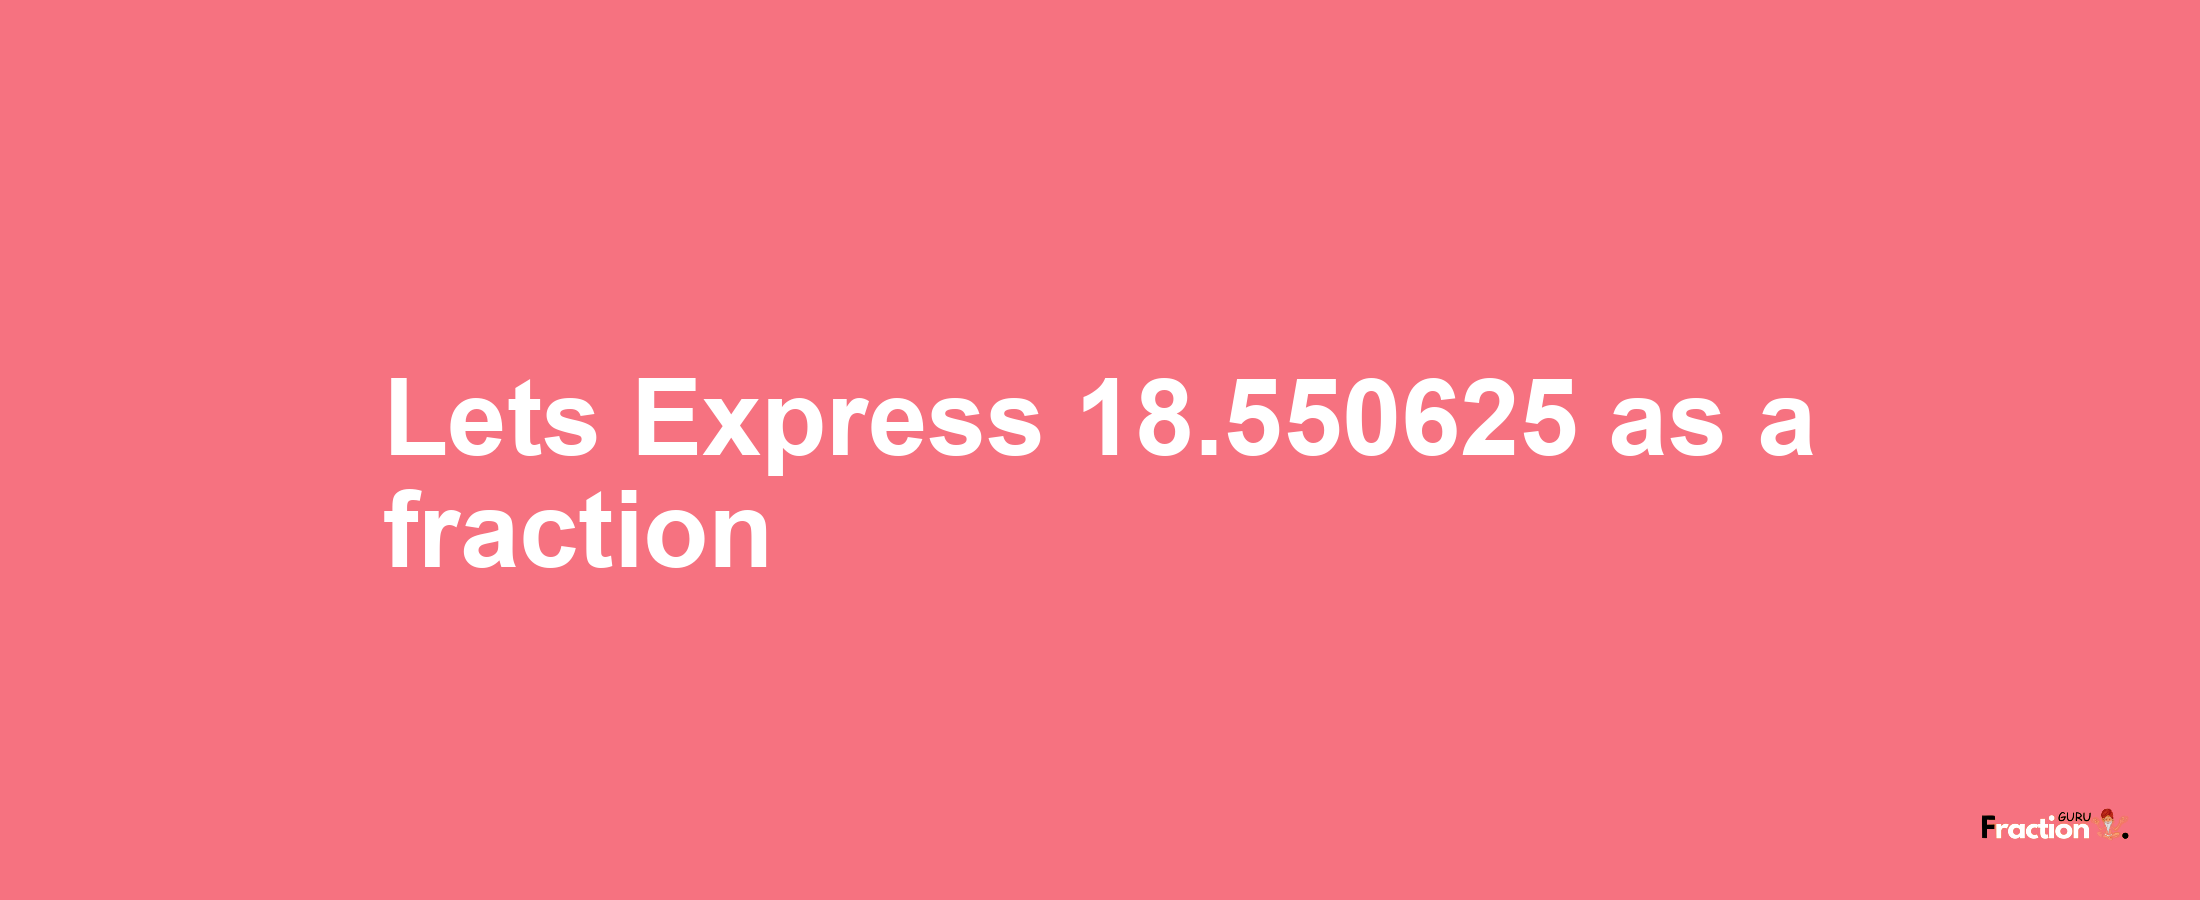 Lets Express 18.550625 as afraction